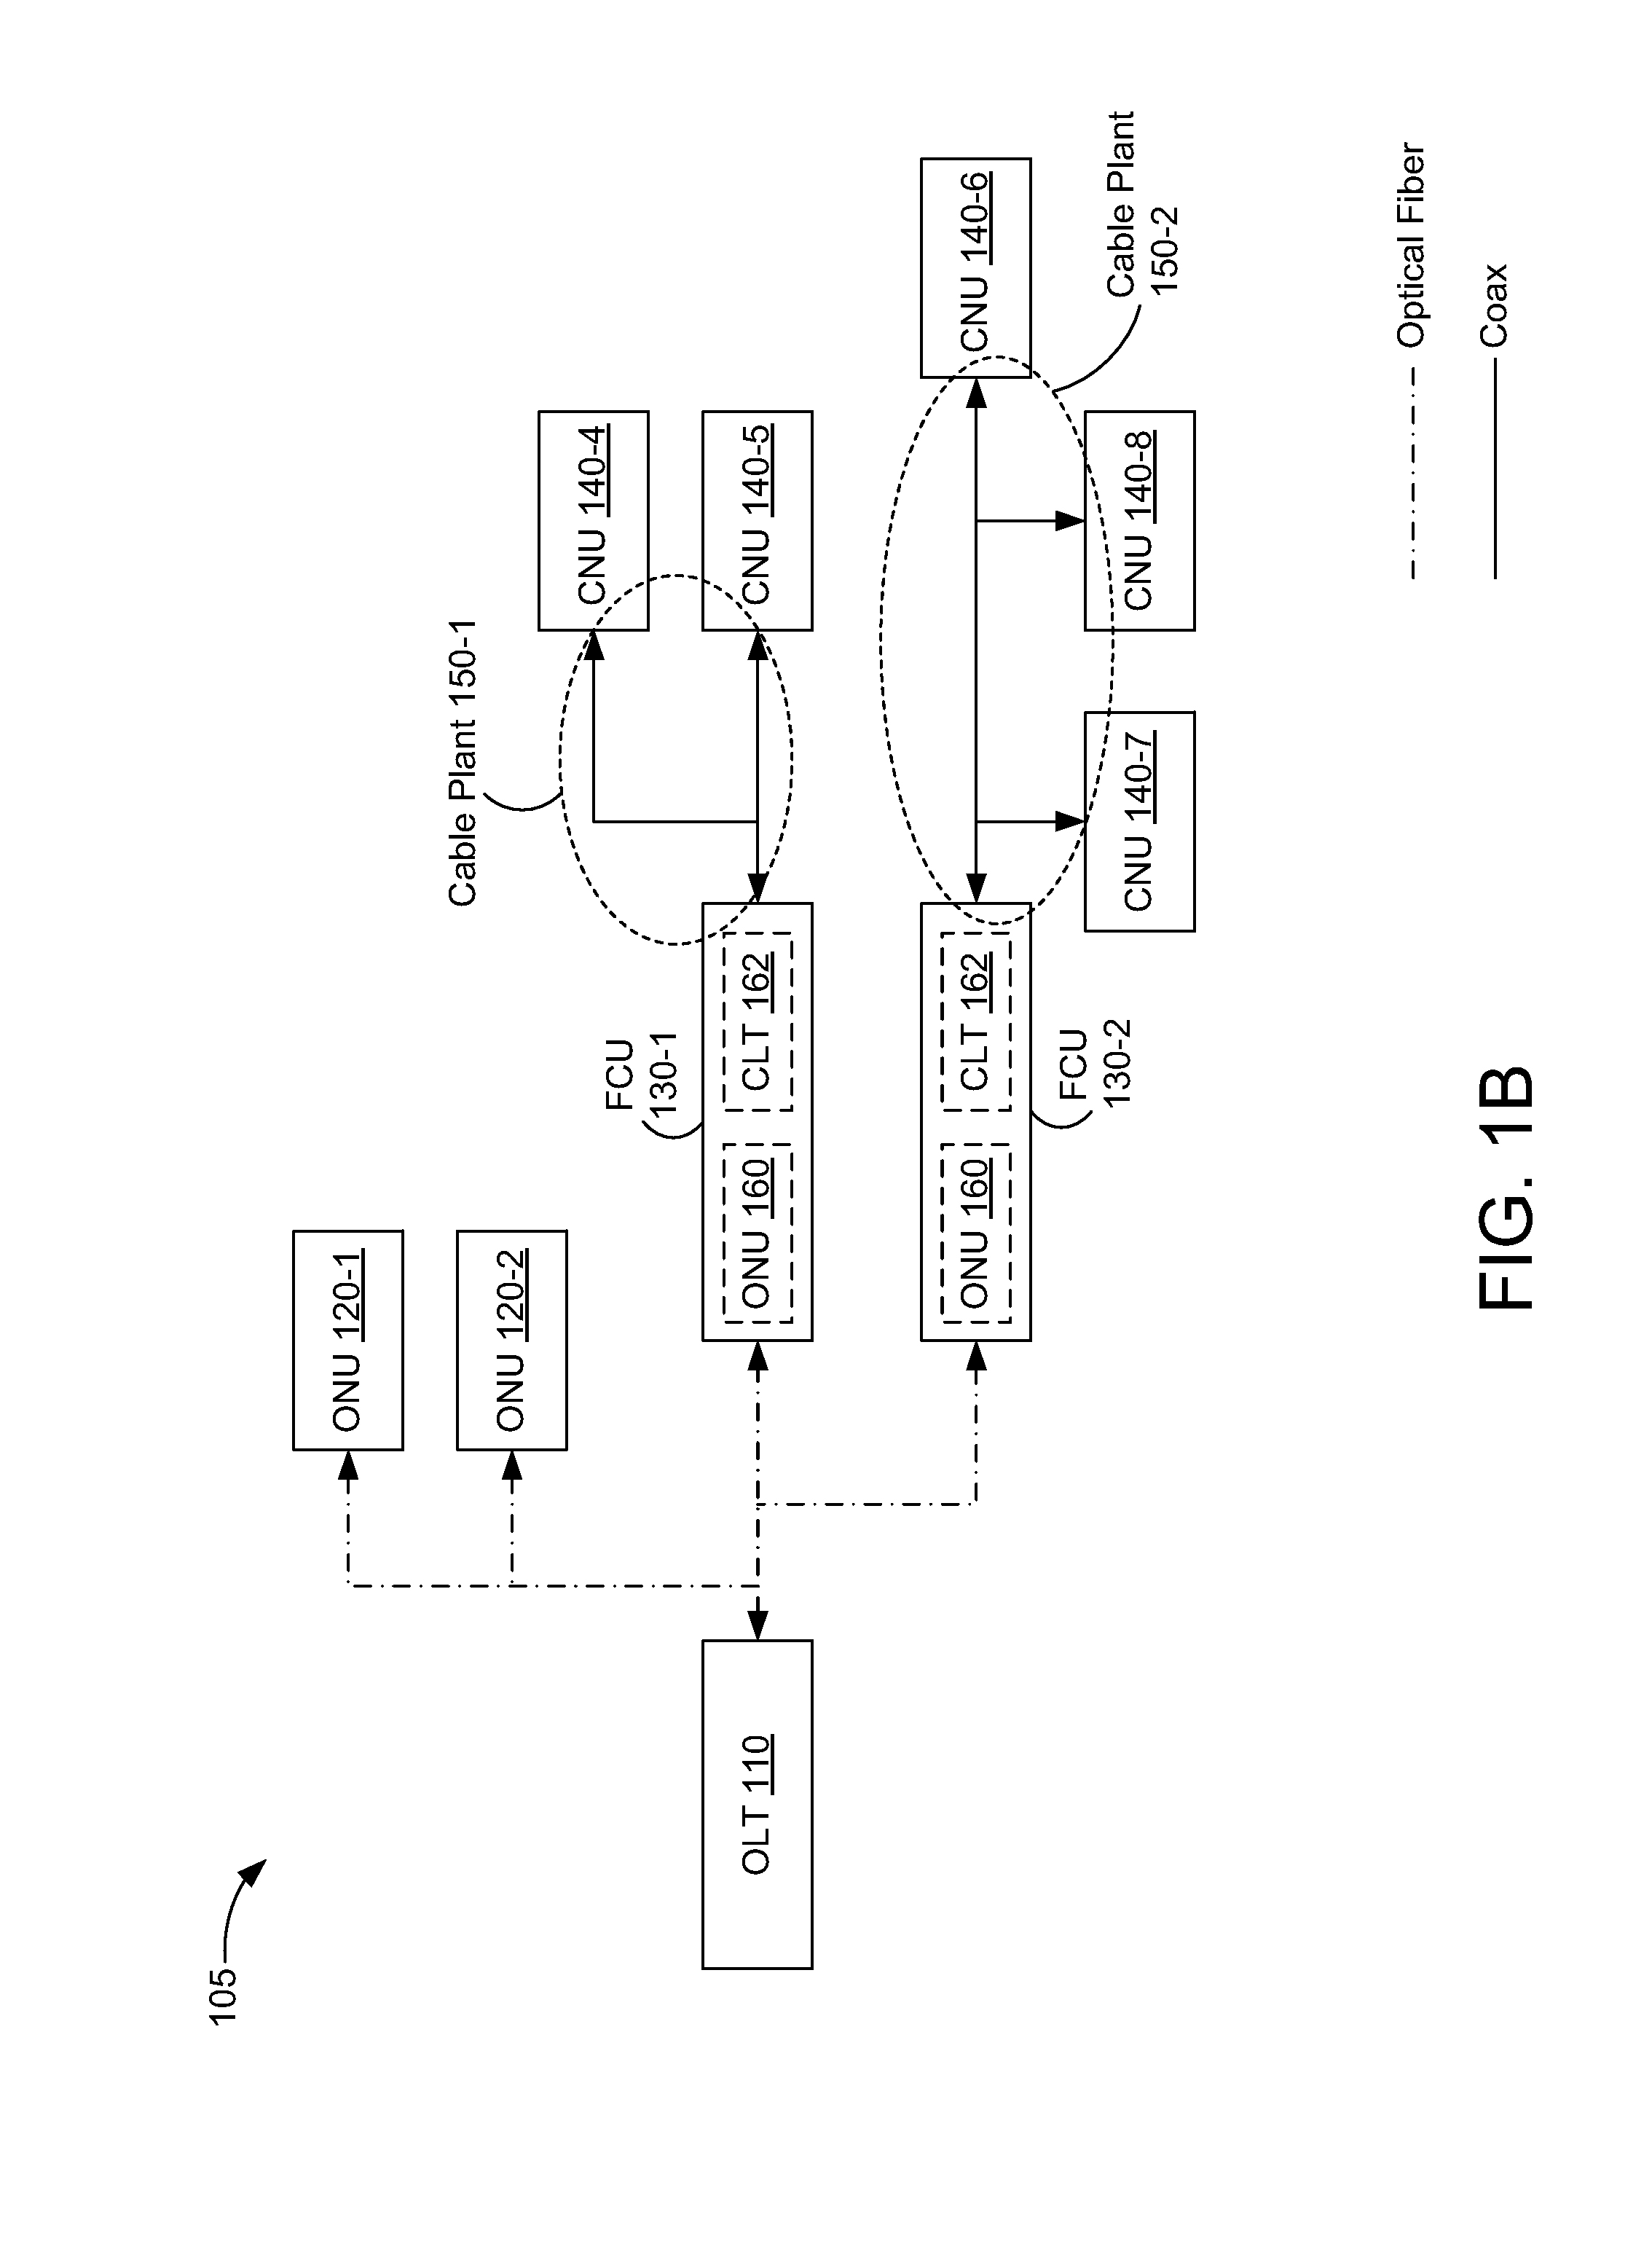 Idle insertion for physical layer rate adaption and time-division duplexing